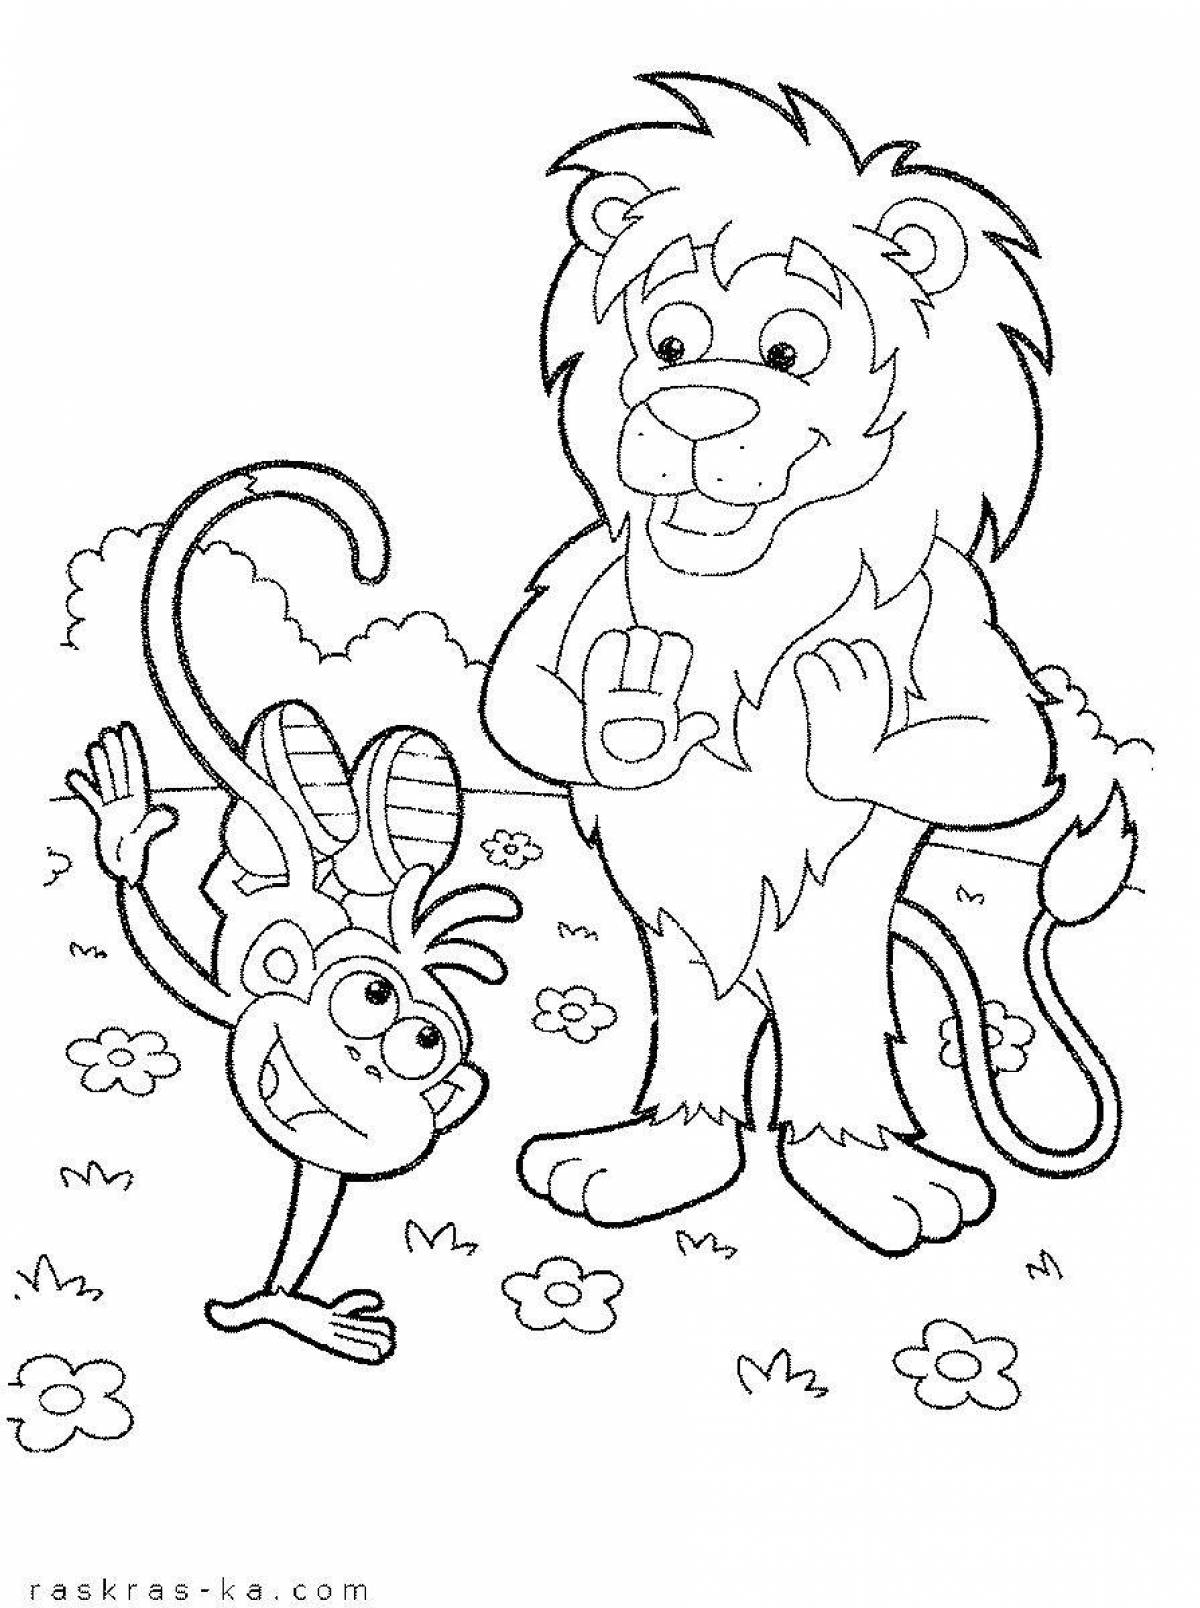 Dazzling lion coloring book for 6-7 year olds